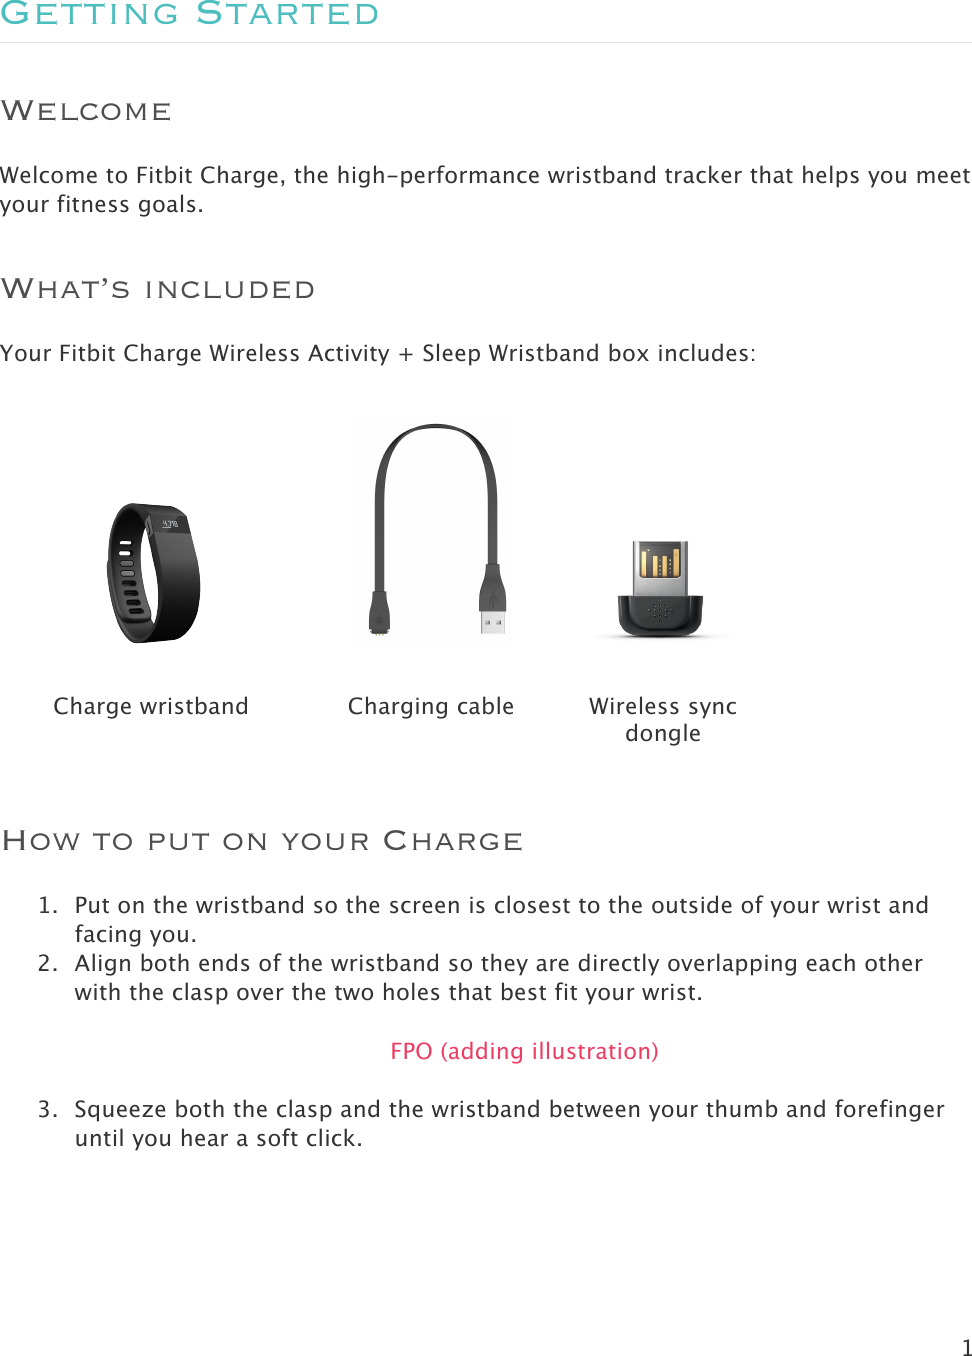 1  Getting Started Welcome Welcome to Fitbit Charge, the high-performance wristband tracker that helps you meet your fitness goals.  What’s included Your Fitbit Charge Wireless Activity + Sleep Wristband box includes:      Charge wristband Charging cable Wireless sync dongle  How to put on your Charge  1. Put on the wristband so the screen is closest to the outside of your wrist and facing you.   2. Align both ends of the wristband so they are directly overlapping each other with the clasp over the two holes that best fit your wrist.  FPO (adding illustration)  3. Squeeze both the clasp and the wristband between your thumb and forefinger until you hear a soft click.  